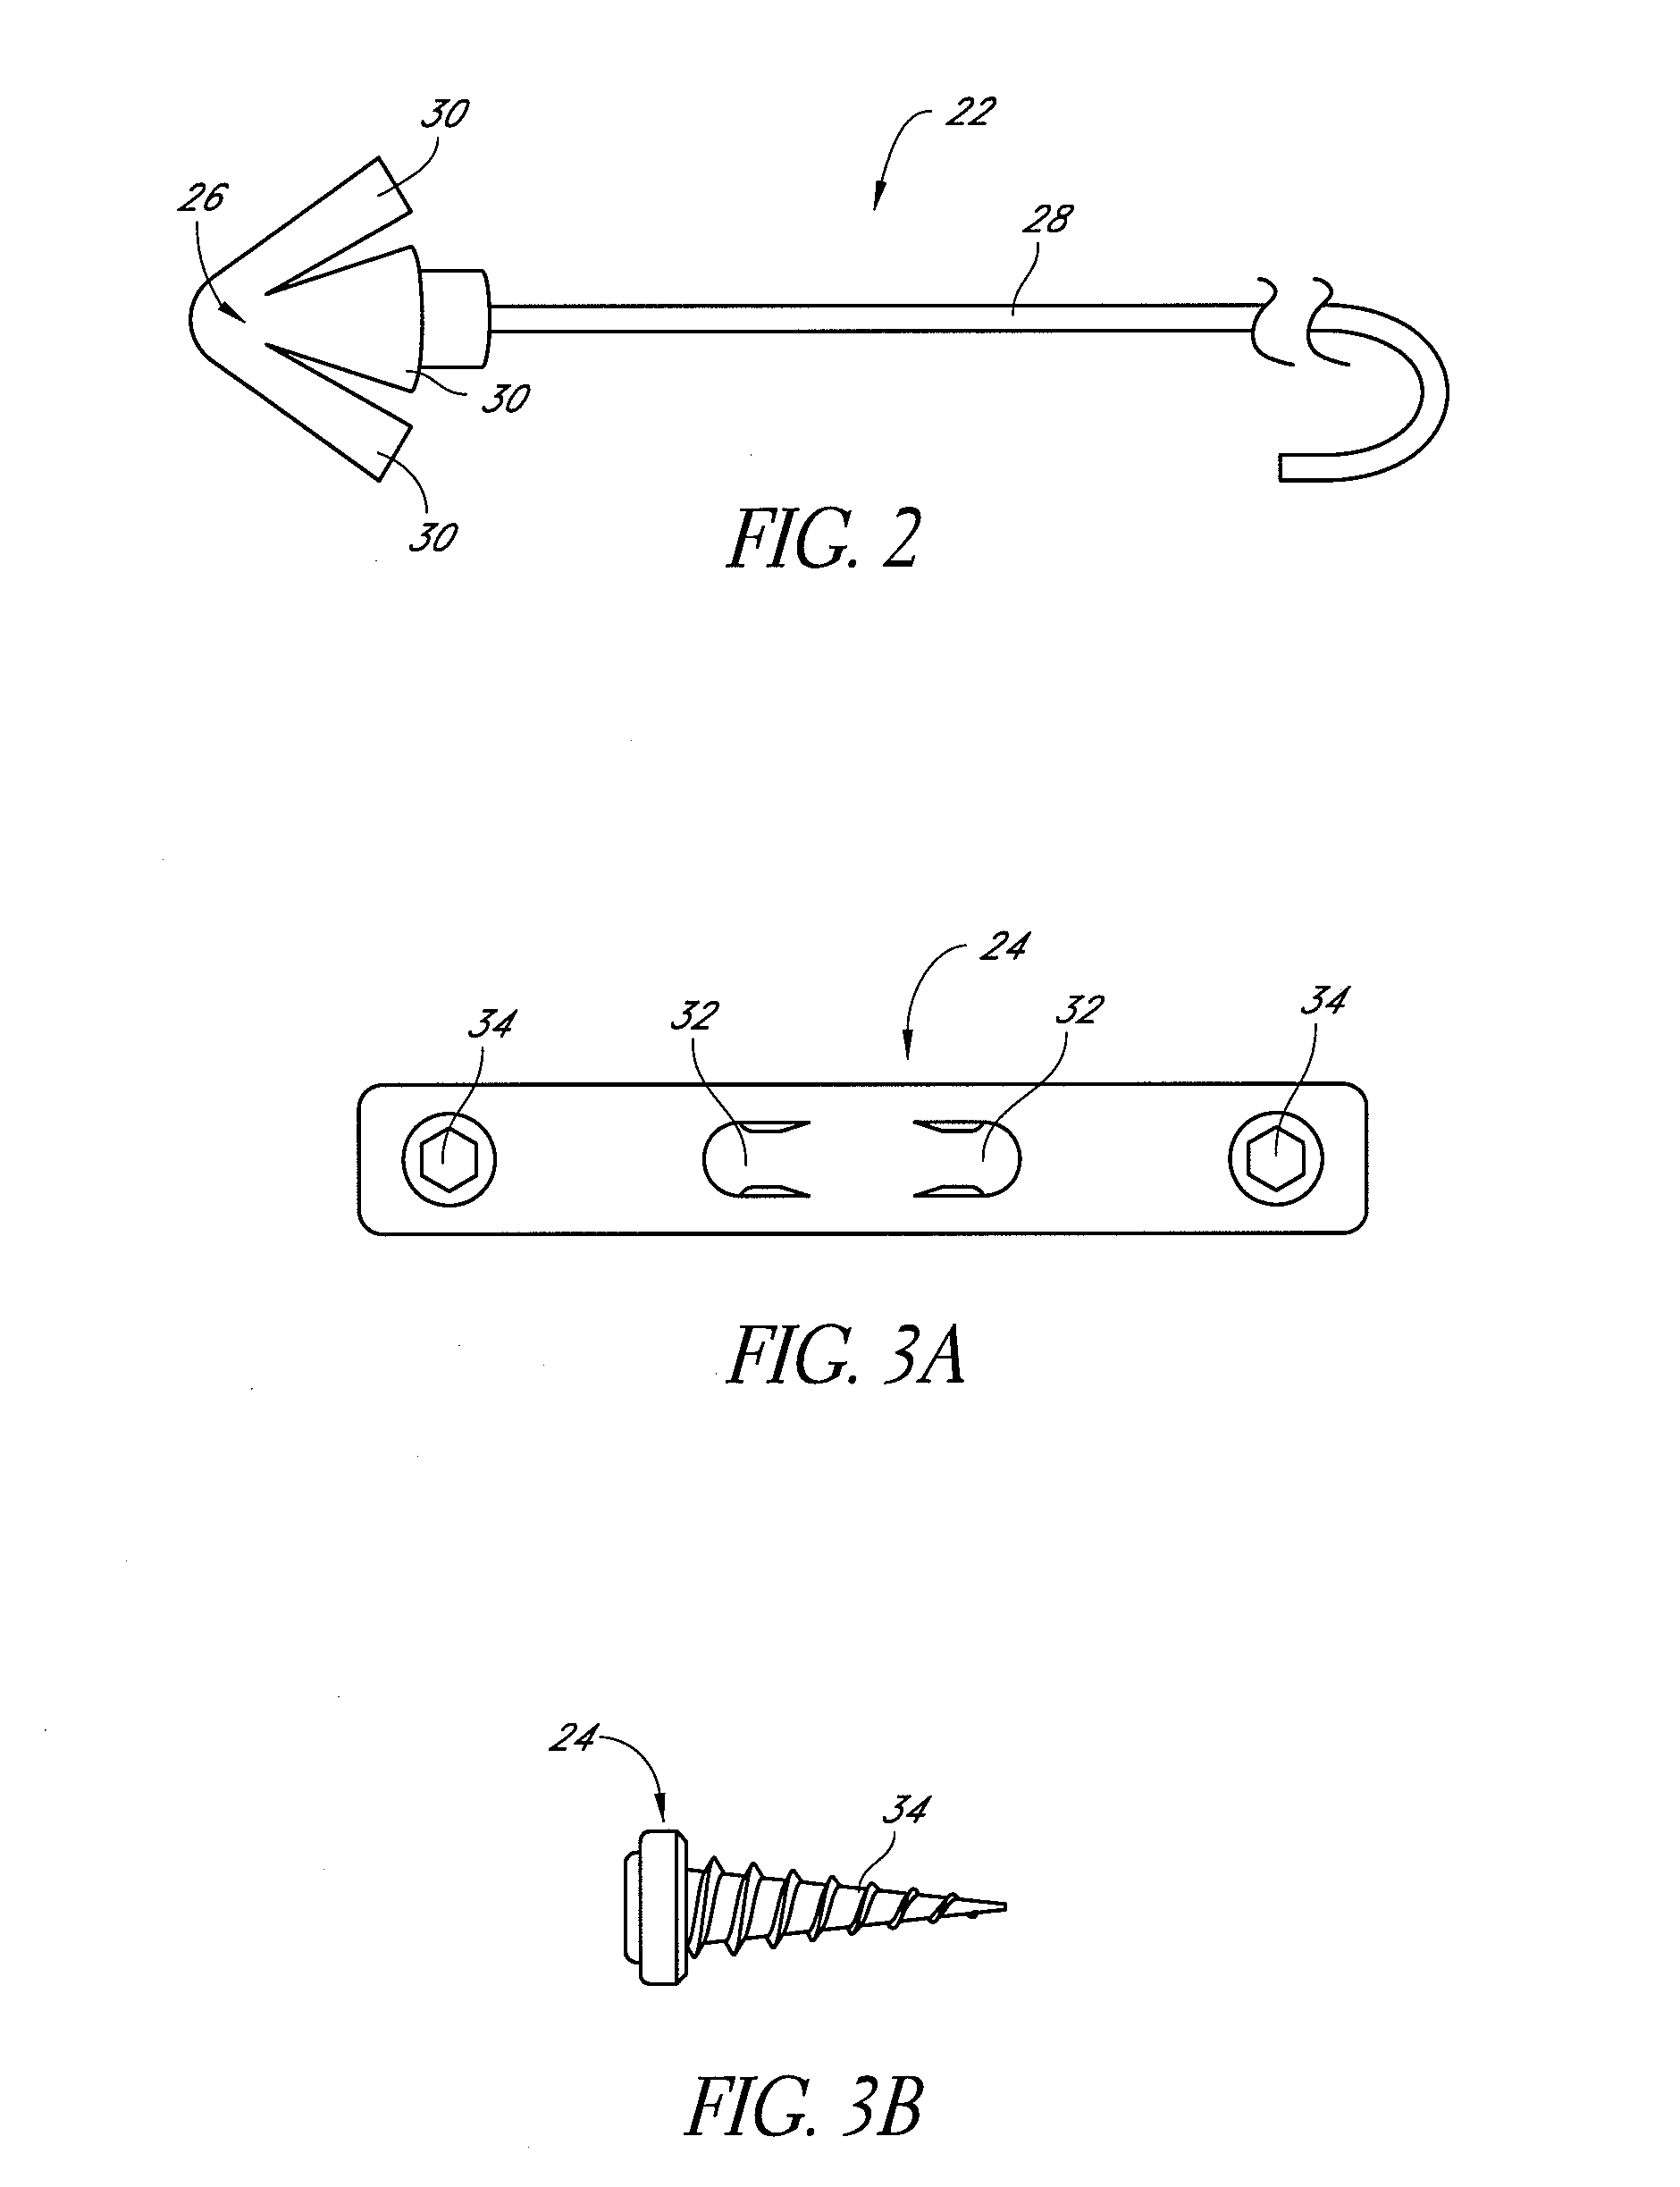 Glossal engagement system and method